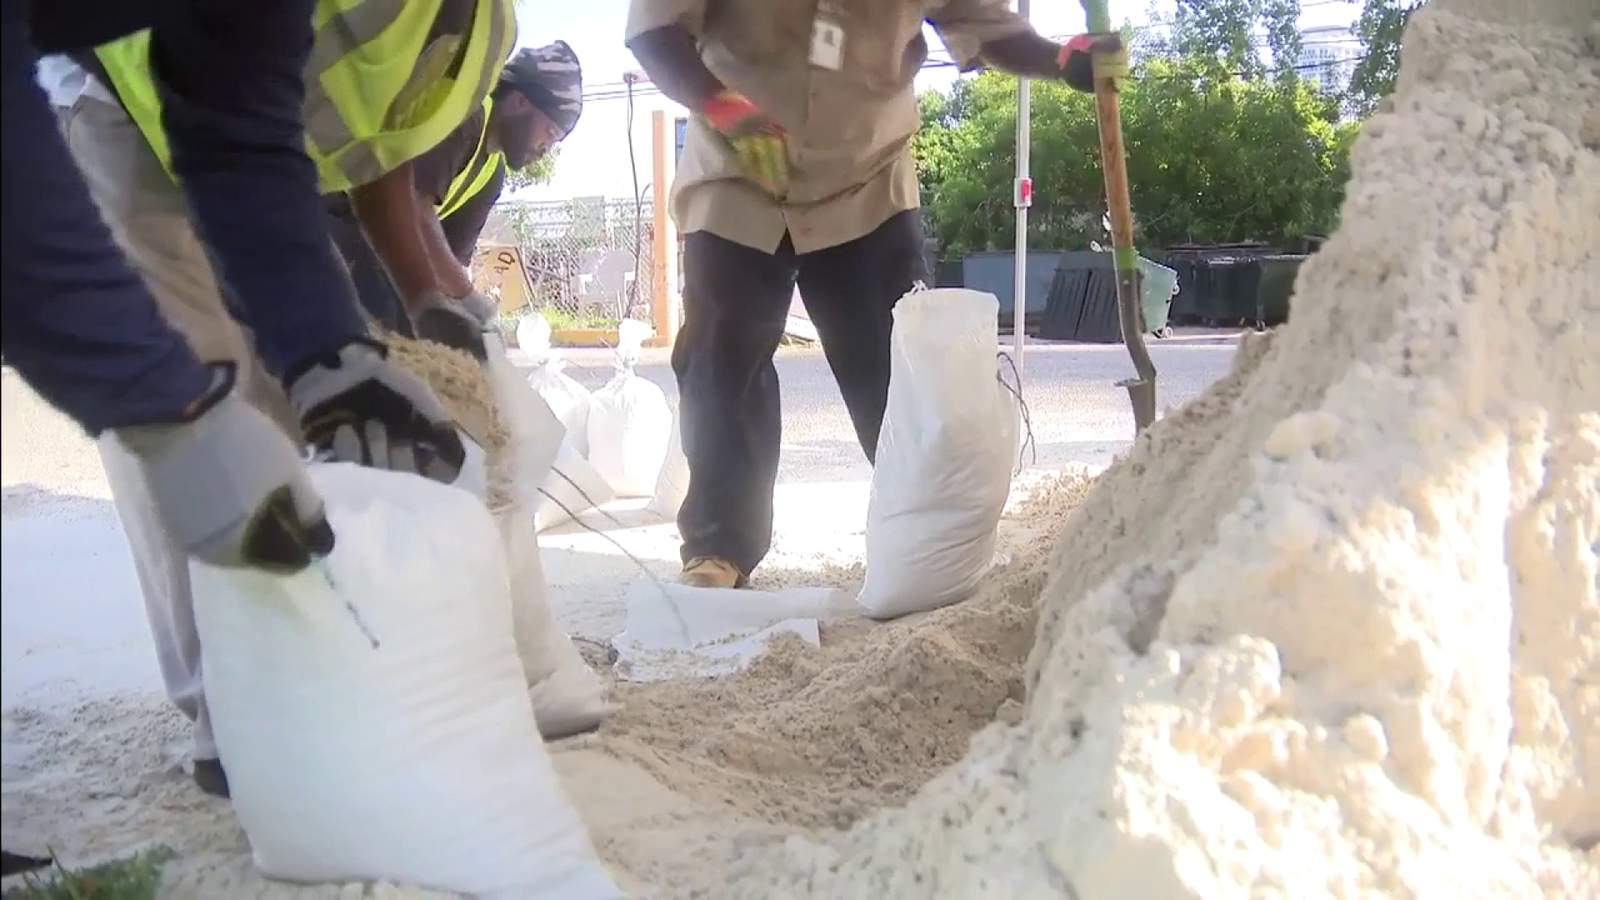 South Florida cities offering free sandbags to residents ahead of Hurricane Isaias